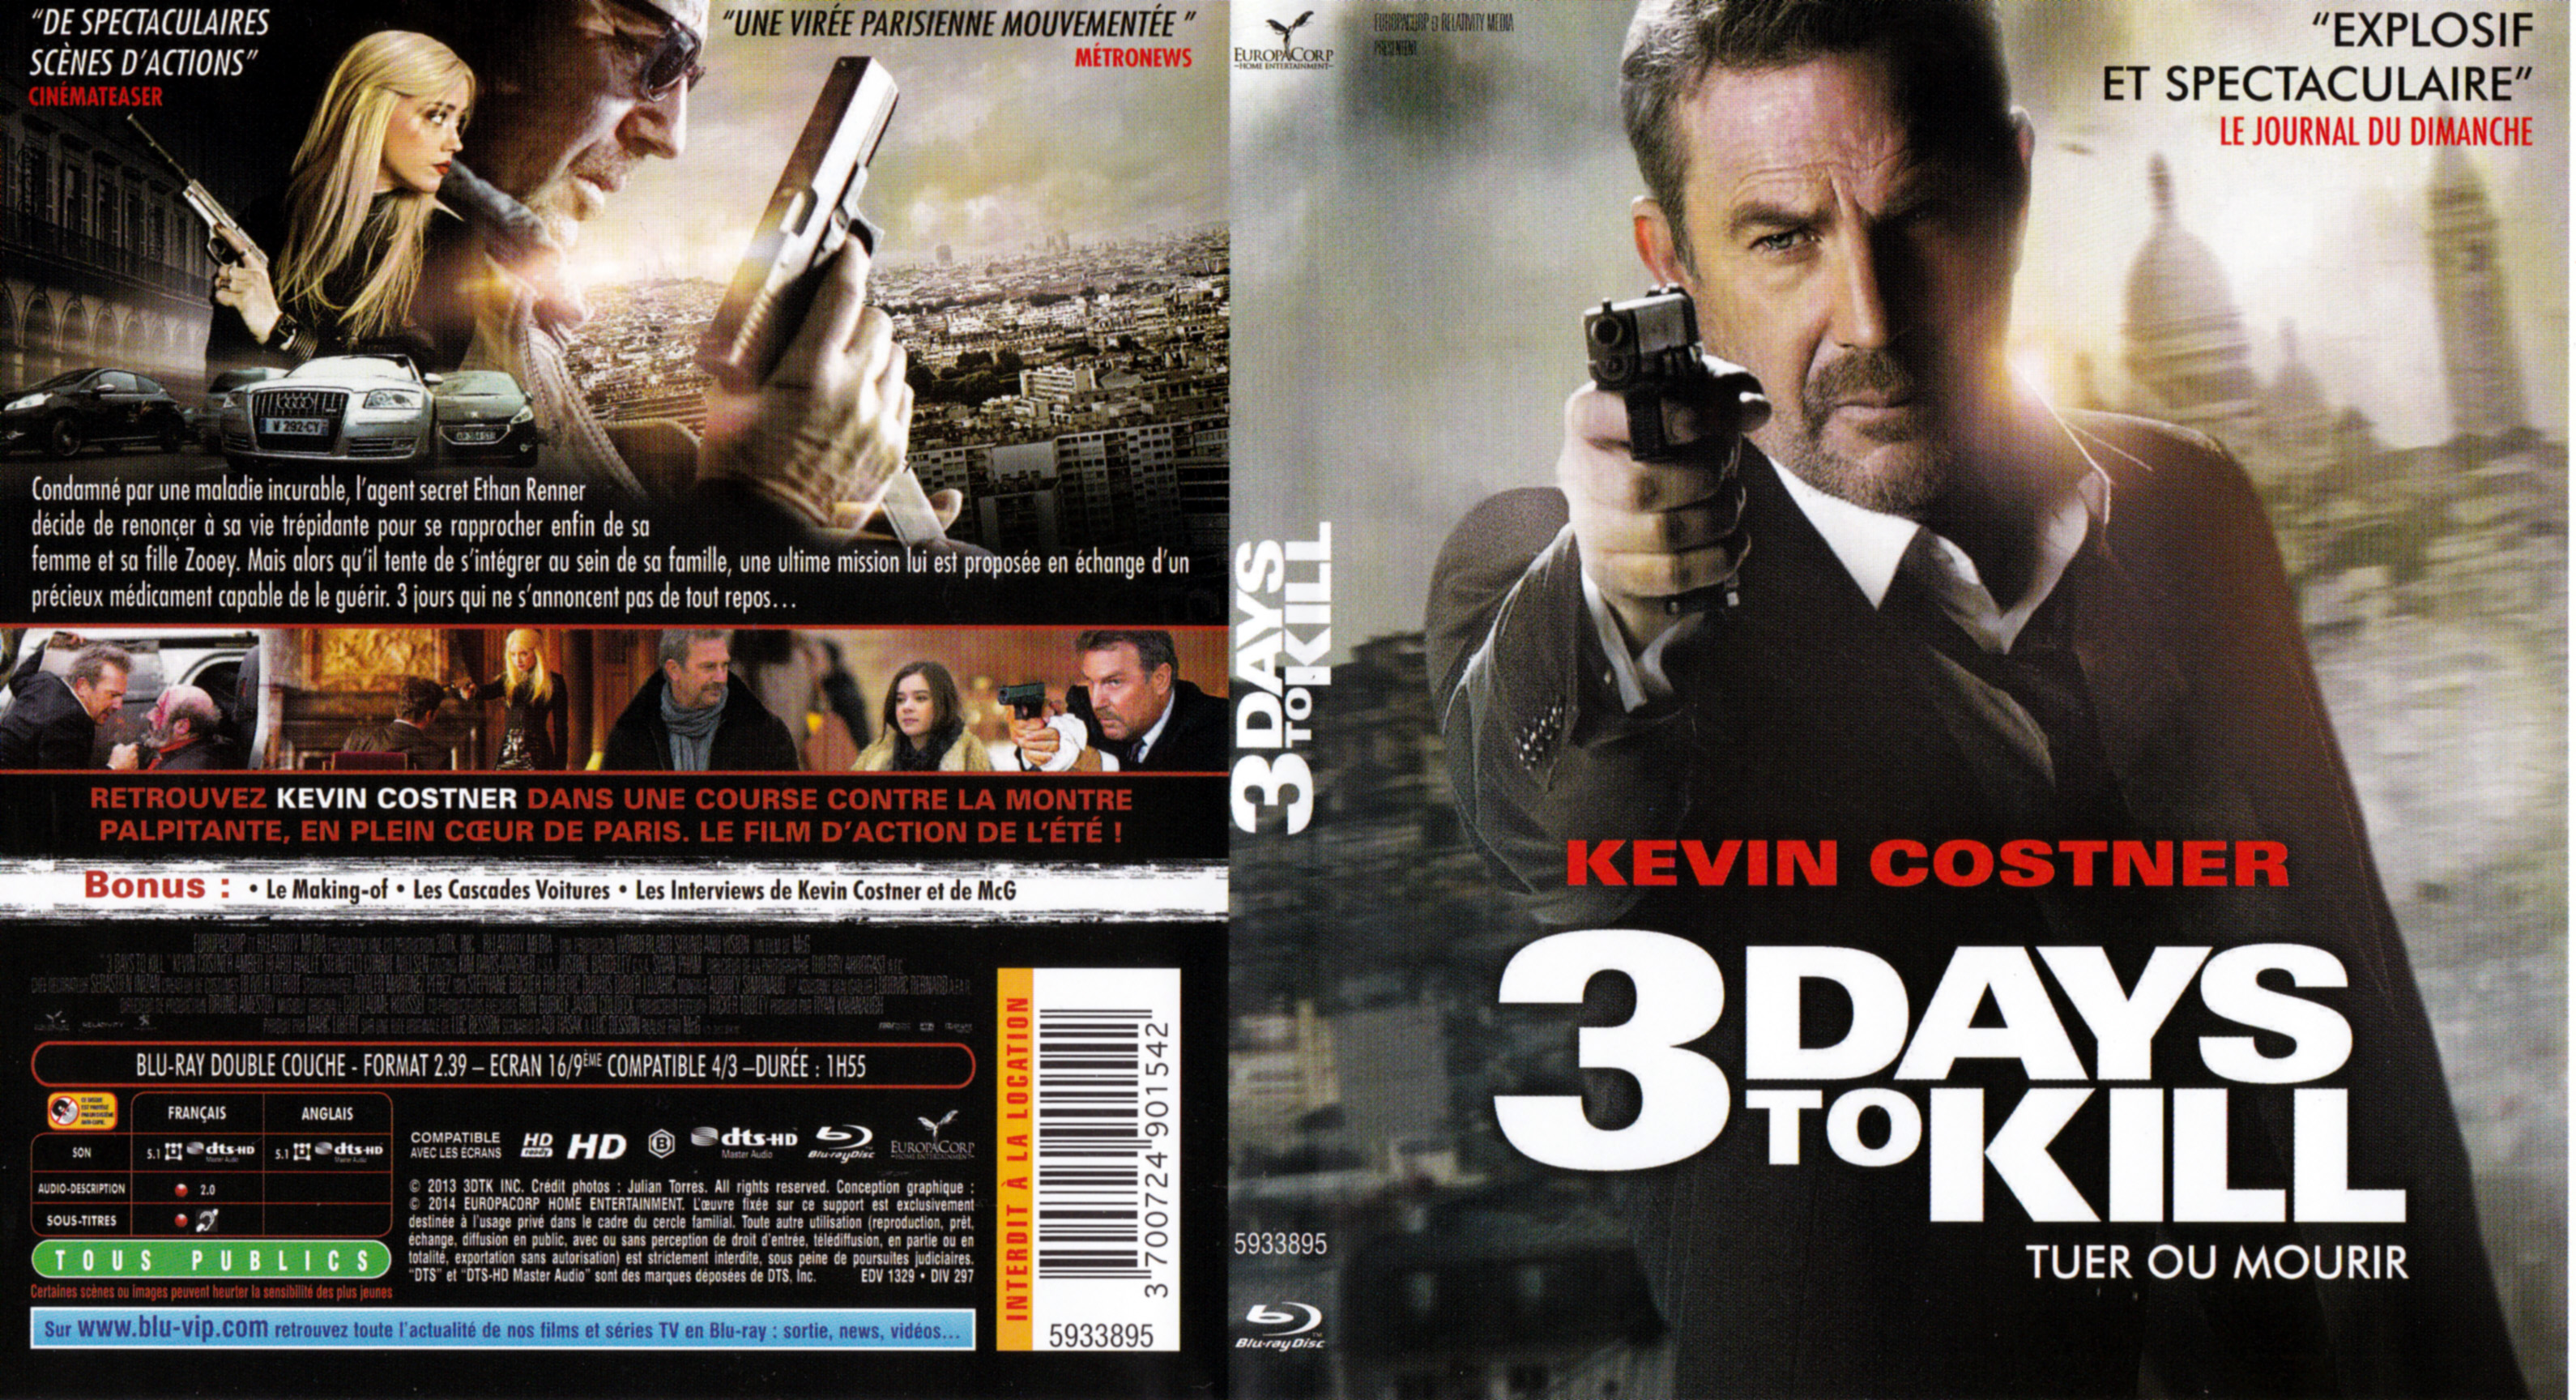 Jaquette DVD 3 Days to Kill (BLU-RAY)